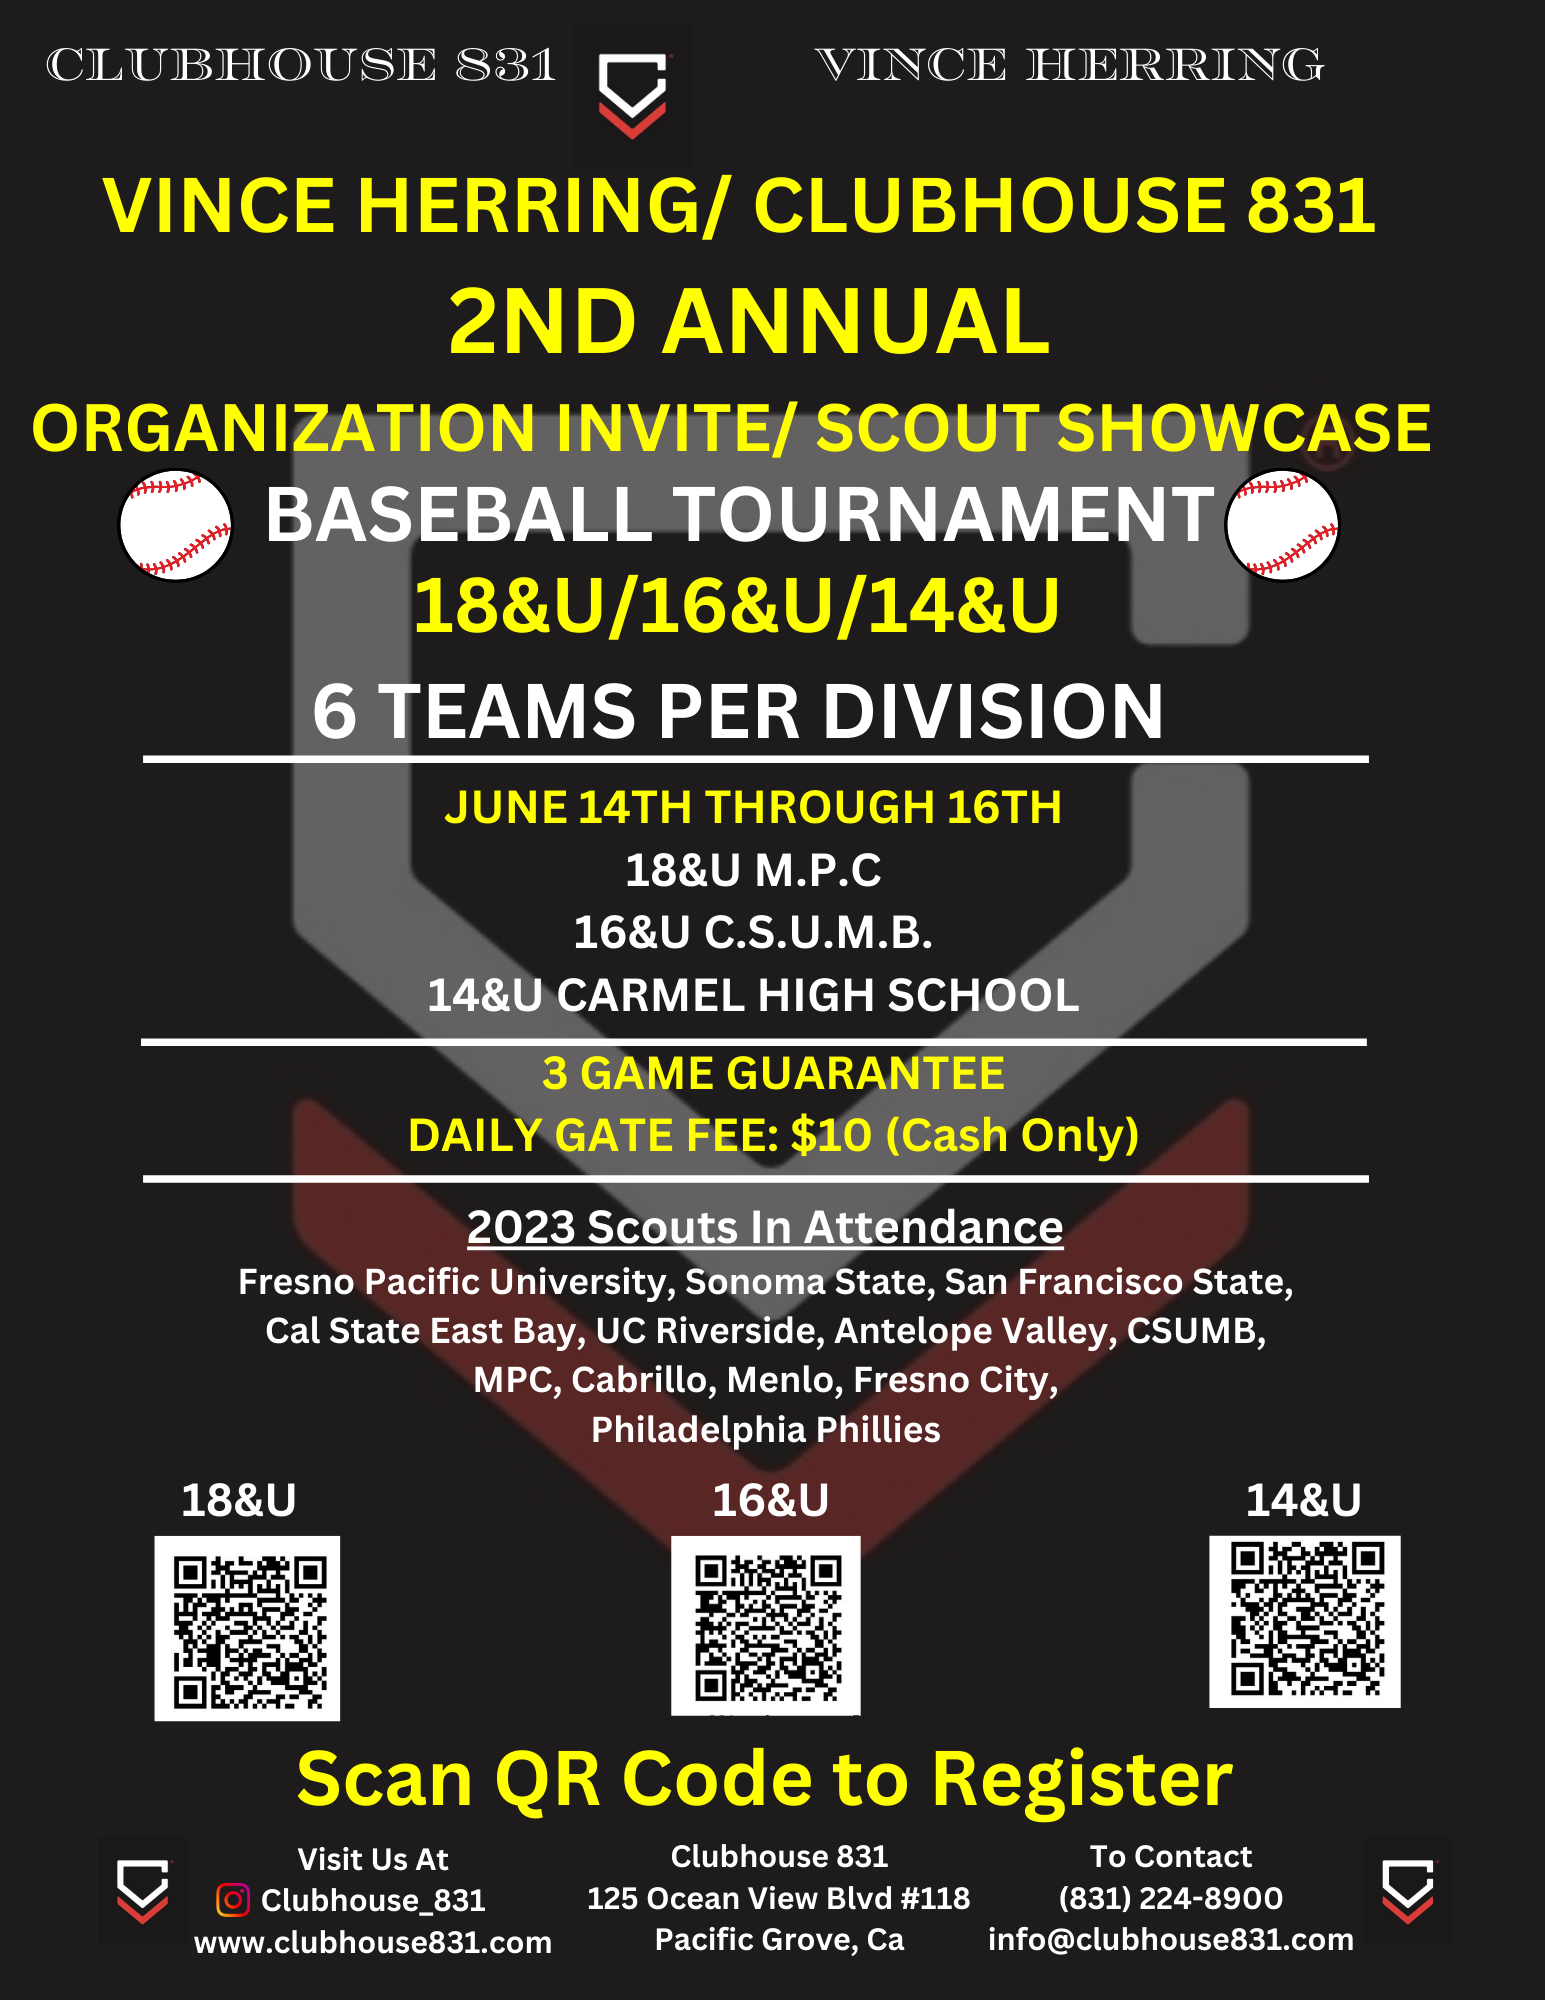 A poster for the vince herring / clubhouse 831 2nd annual organization invite / scout showcase baseball tournament.